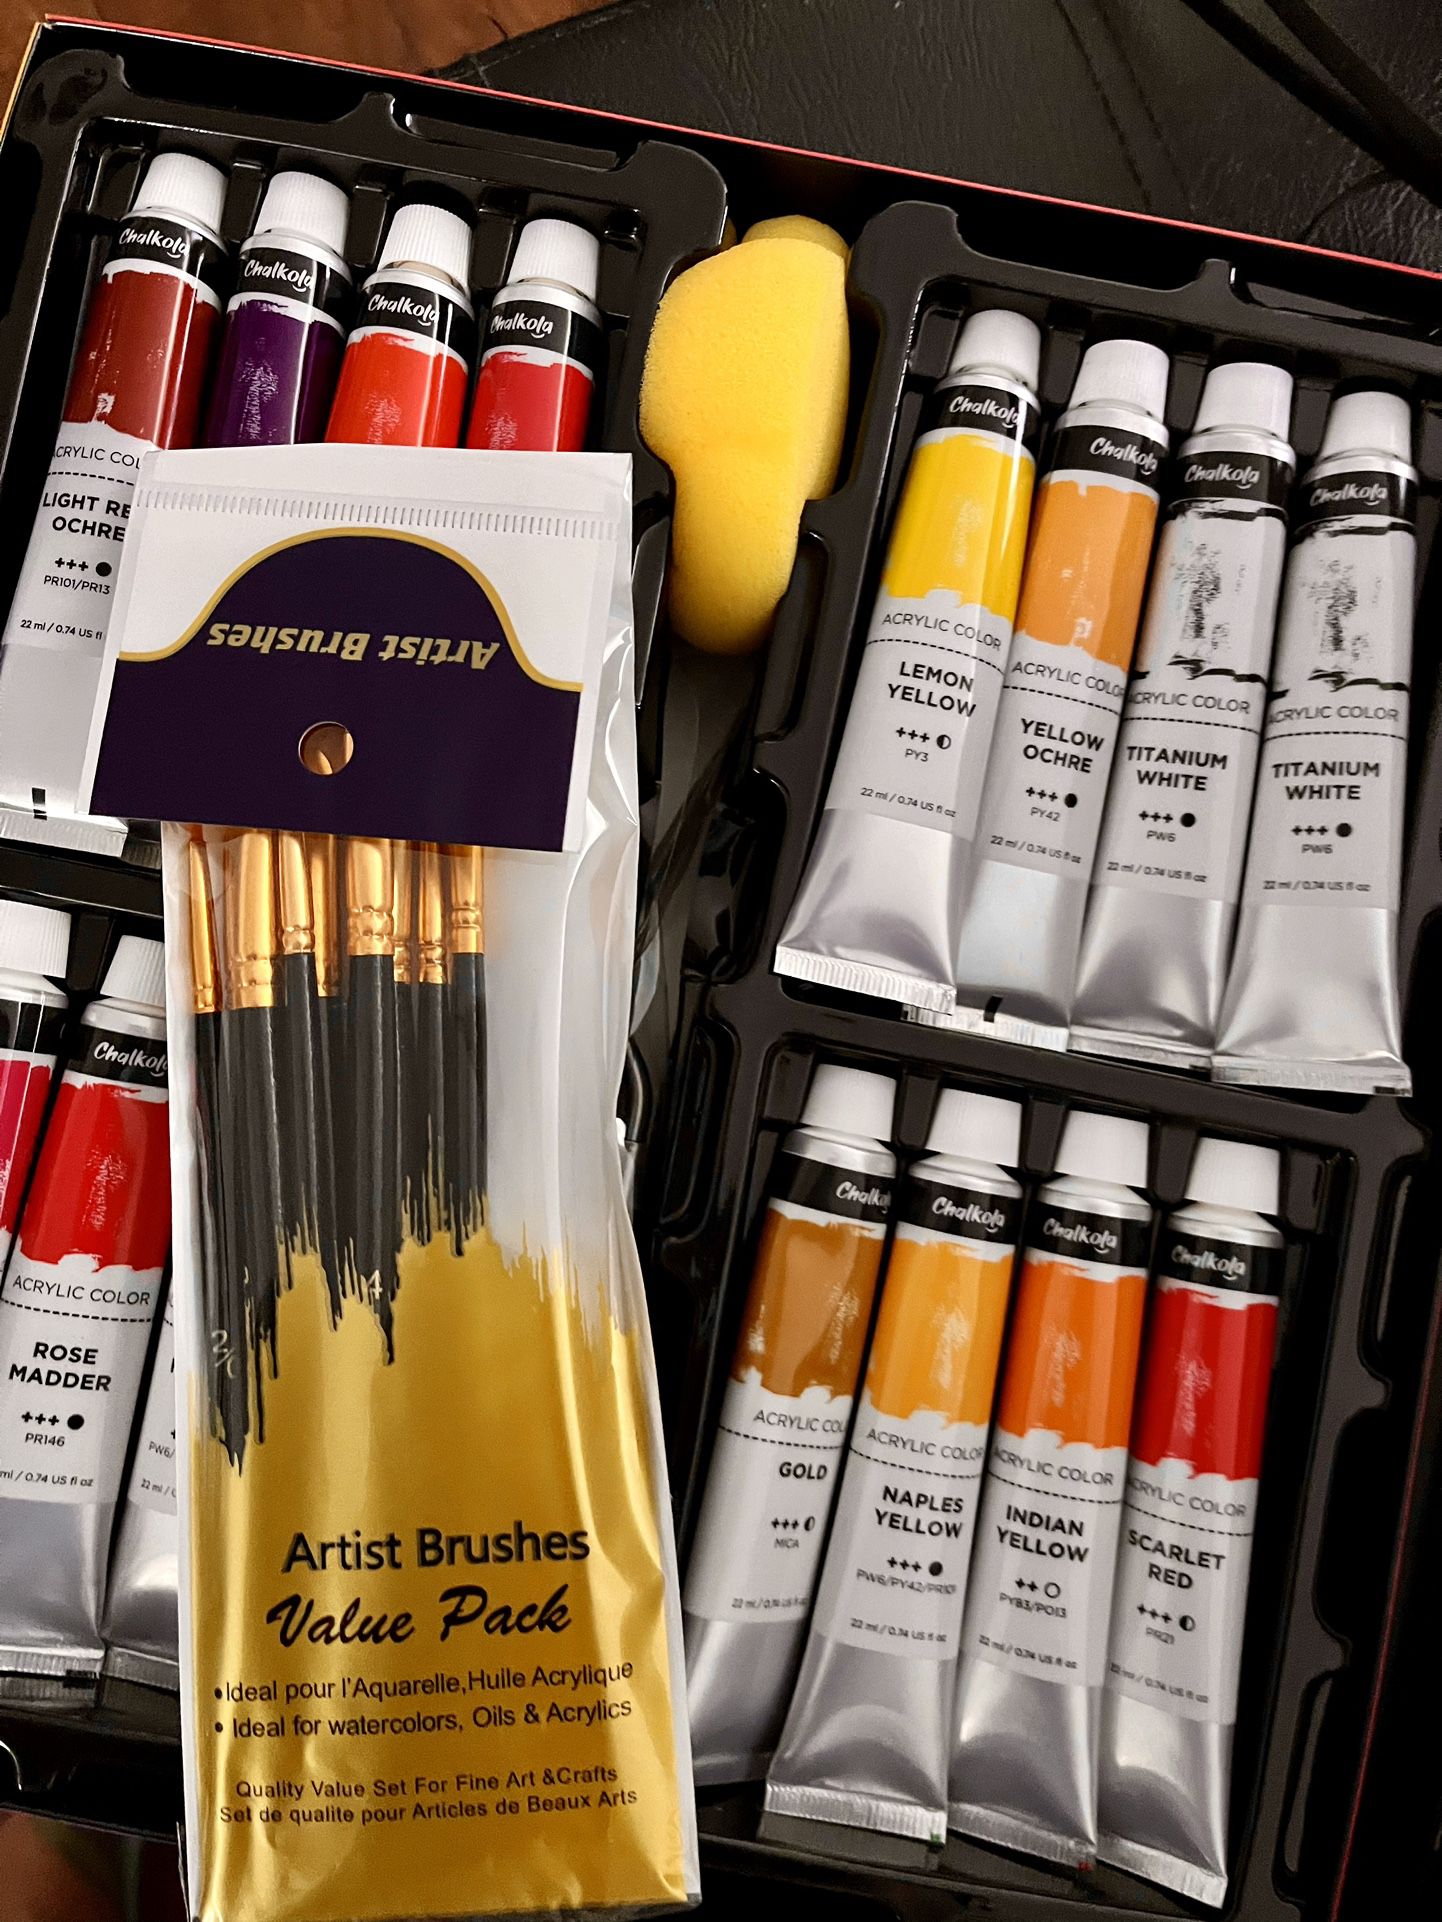 32 Metallic Paint Tubes (22ml) (incl Gold, Silver), 10 Painting Brushes, 1 Knife, 1 Sponge & 1 Palette - Metalic Acrylic Craft Paint